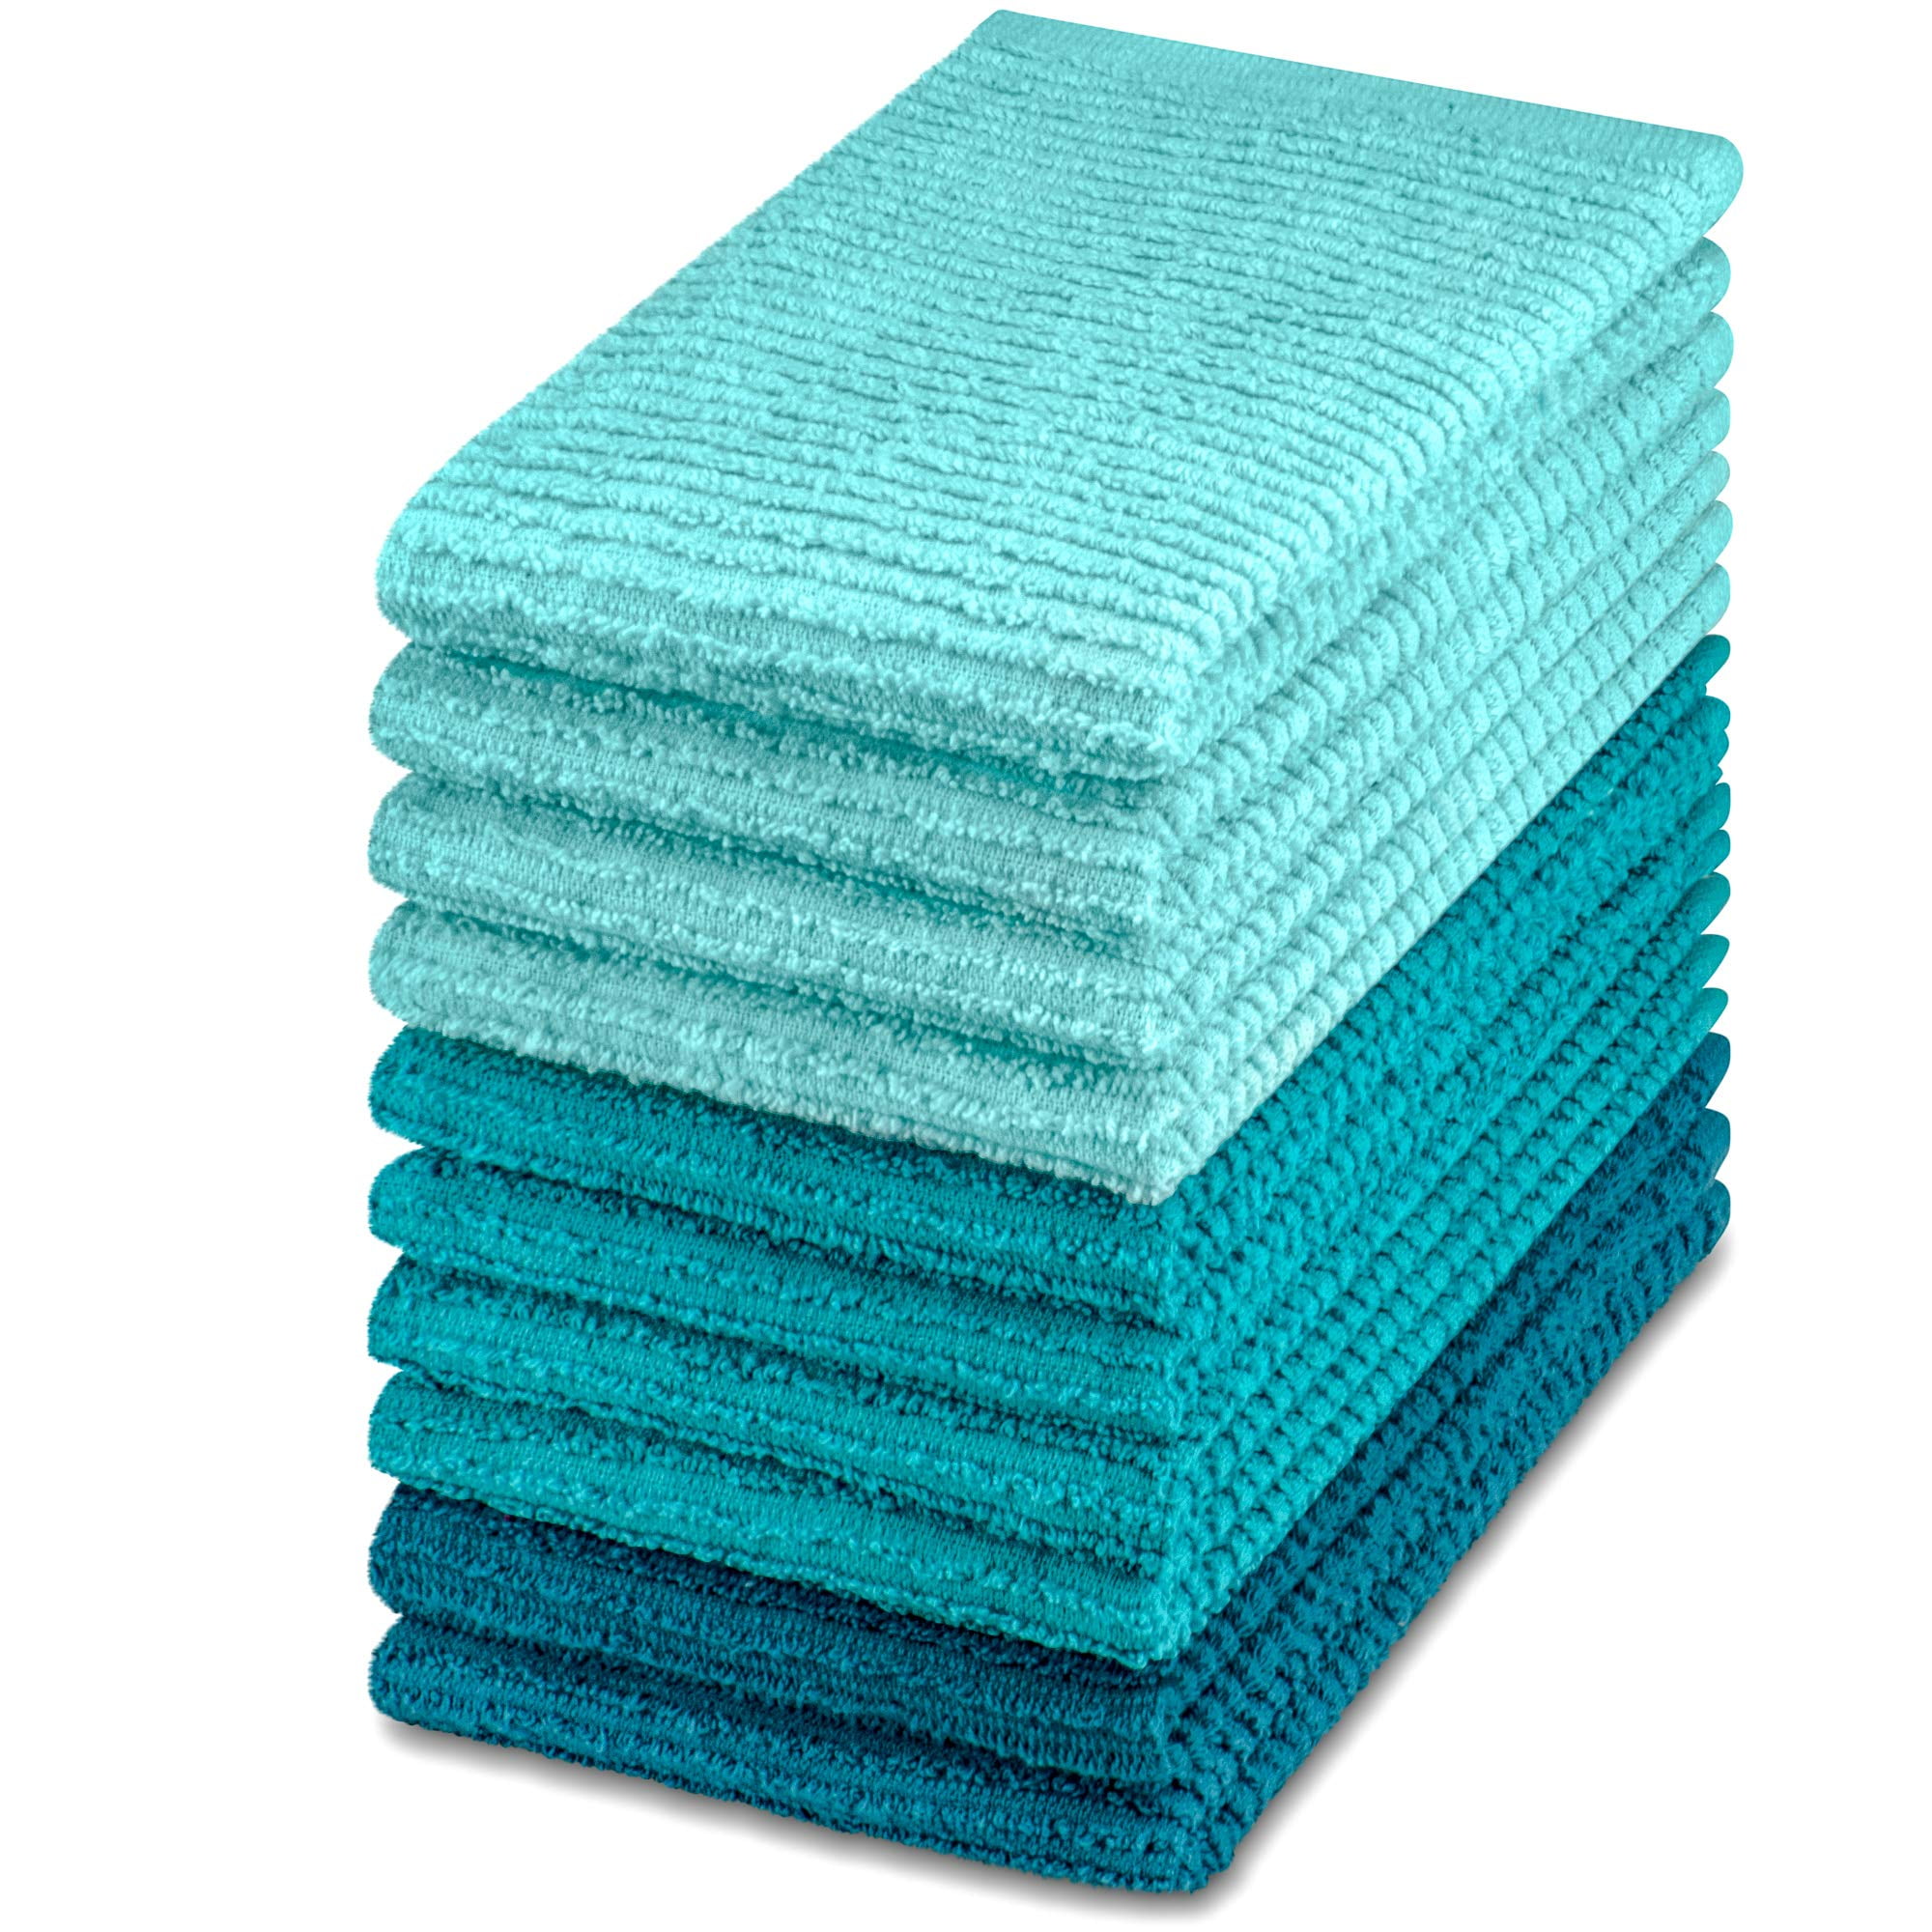 Oakias 100% Cotton White Bar Mop Towels - 12 Pack Kitchen Towels - 16 x 19 Inches- Highly Absorbent Multi-Purpose Cleaning Towels and Bar Rags